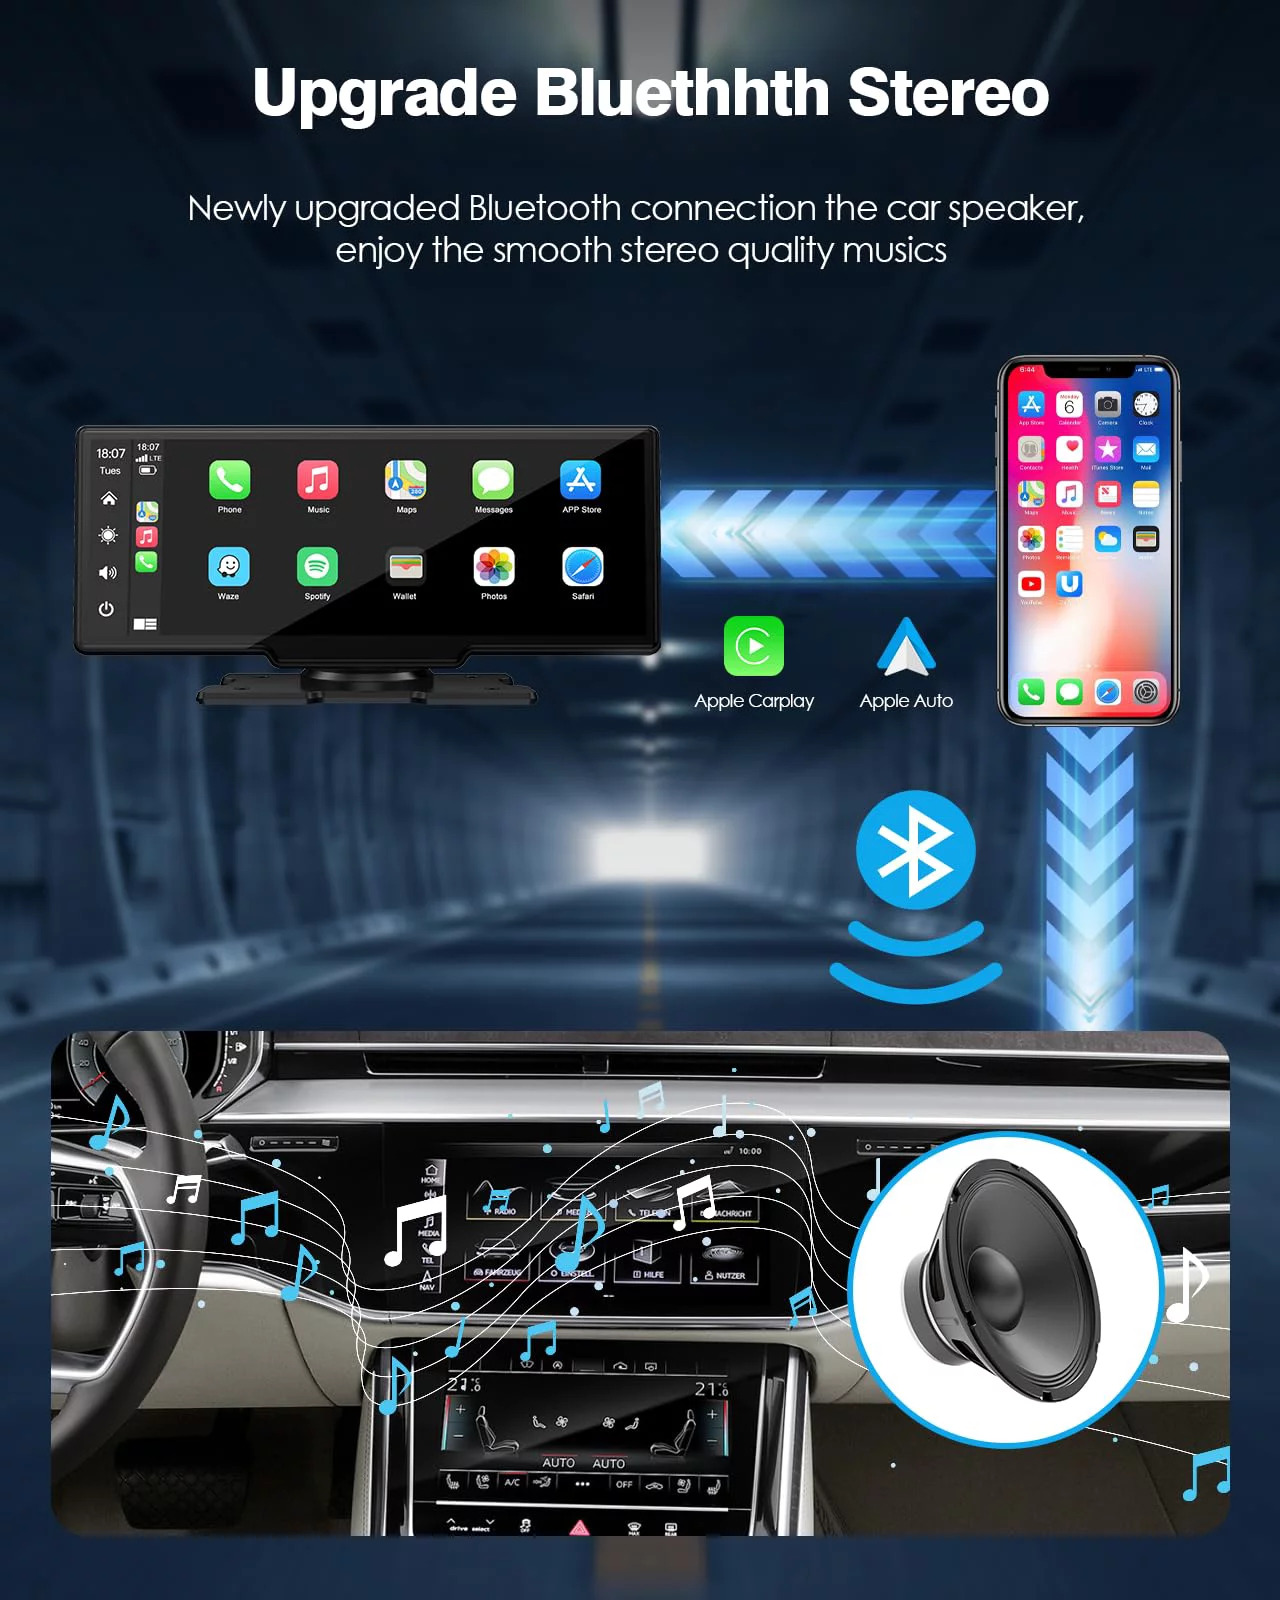 Lamtto 9.26" Wireless Car Stereo Apple Carplay with 2K Dash Cam, 1080P Backup Camera, Portable Touchscreen GPS Navigation for Car, Car Stereo Receiver with Bluetooth, AirPlay, AUX/FM, Googel, Siri